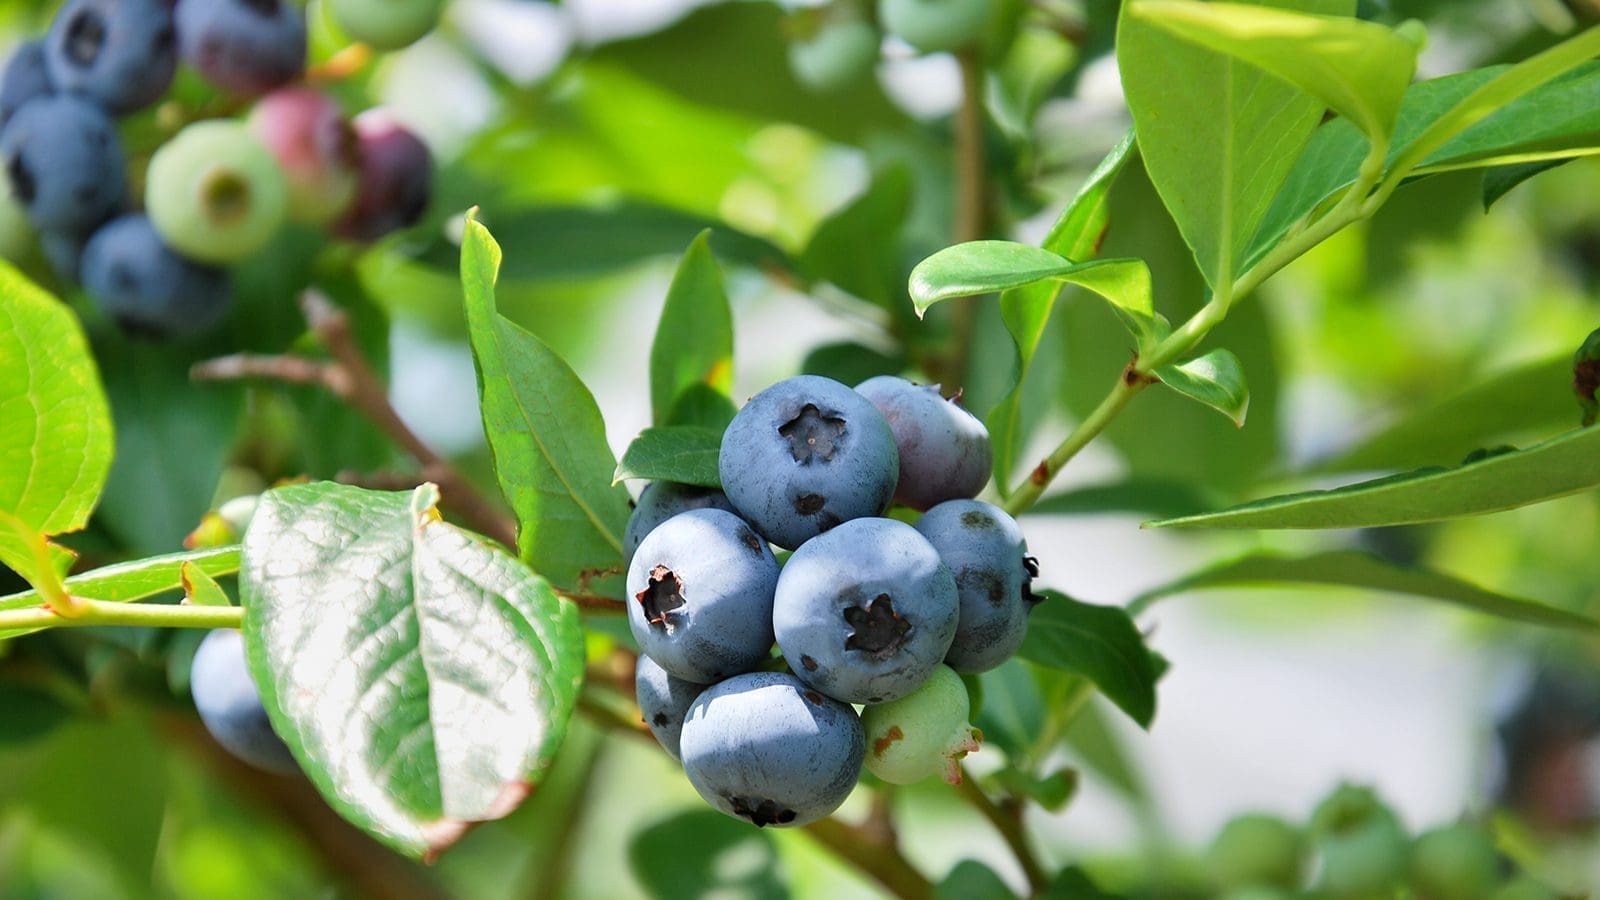 Chilean Agroberries Limited expands blueberry farming venture to Morocco with US$41m investment